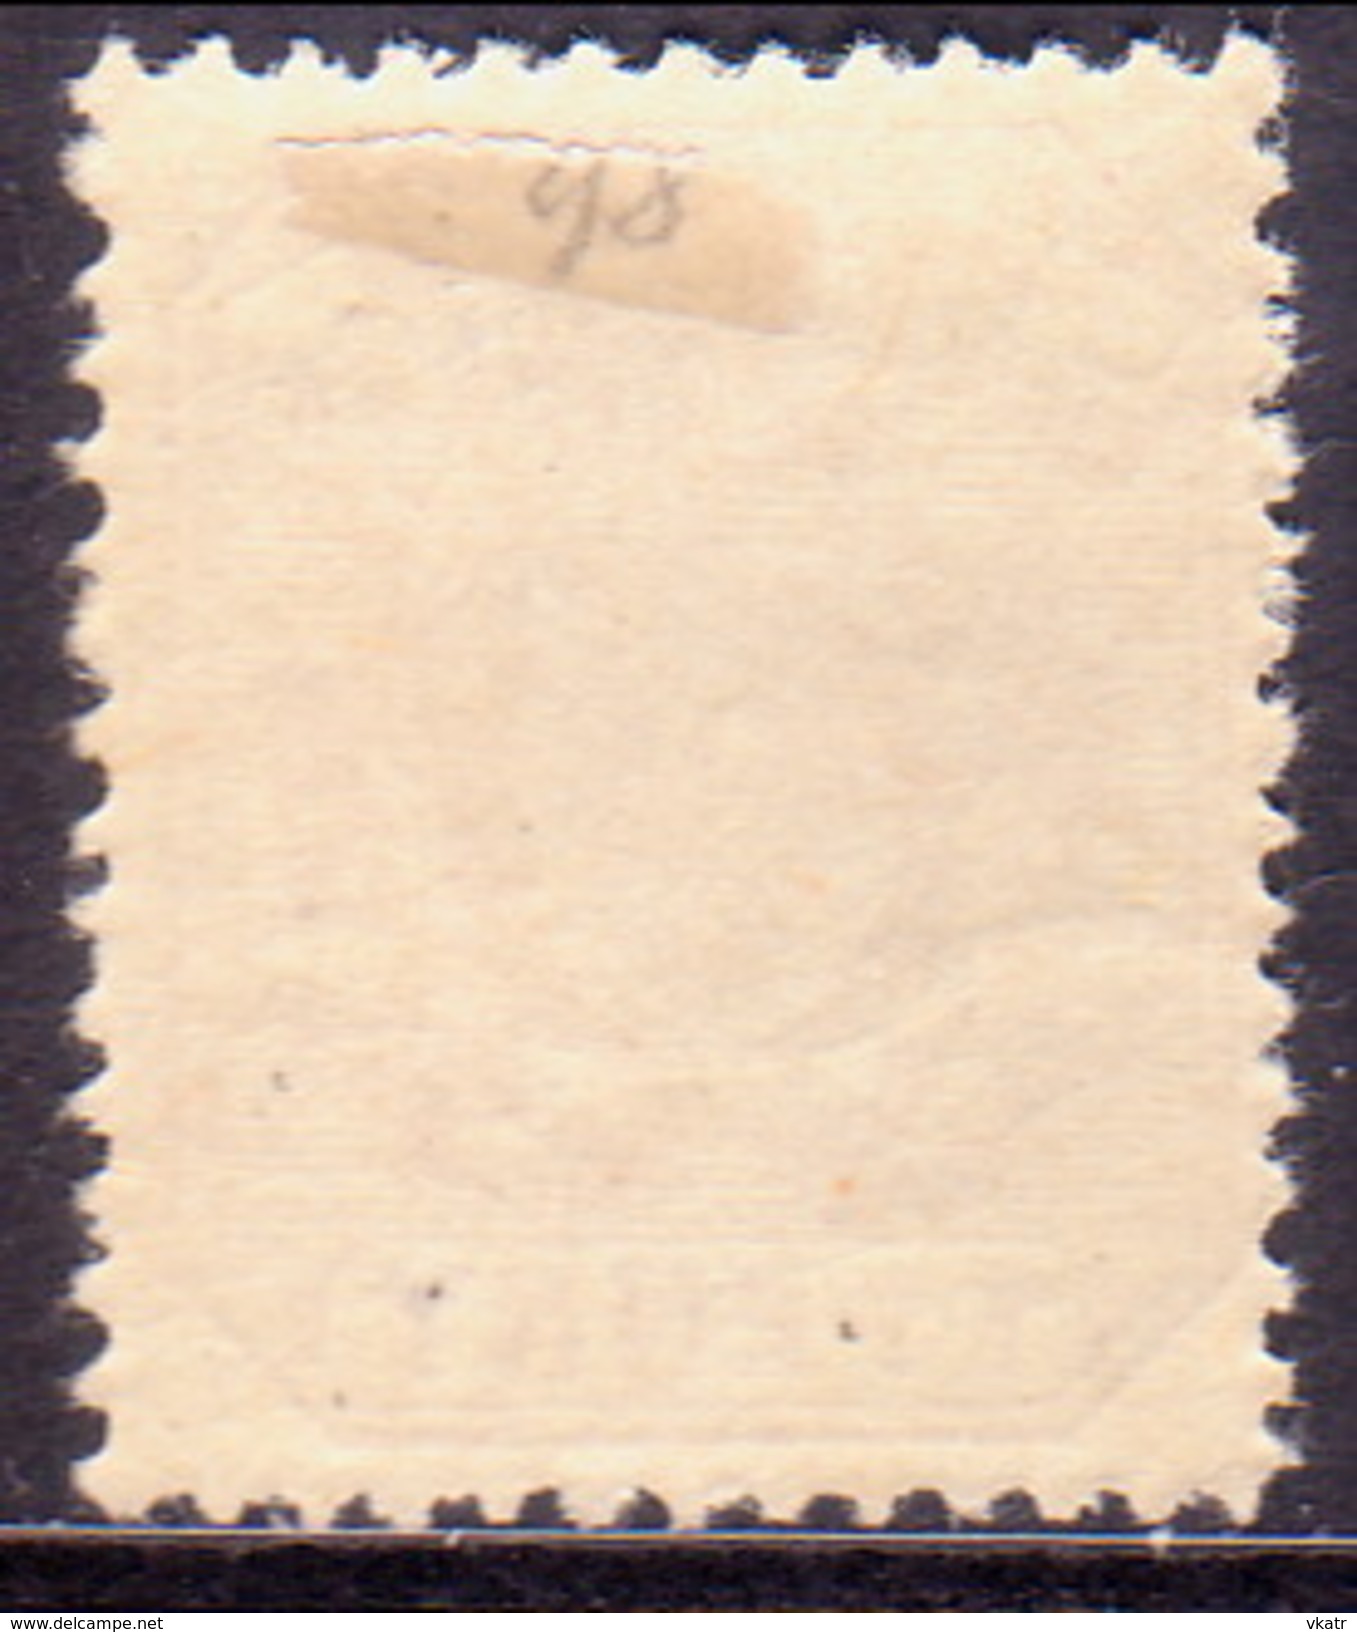 SOUTH AFRICA TRANSVAAL 1895 SG #206 1d MH Rose-red Wagon With Pole - Transvaal (1870-1909)